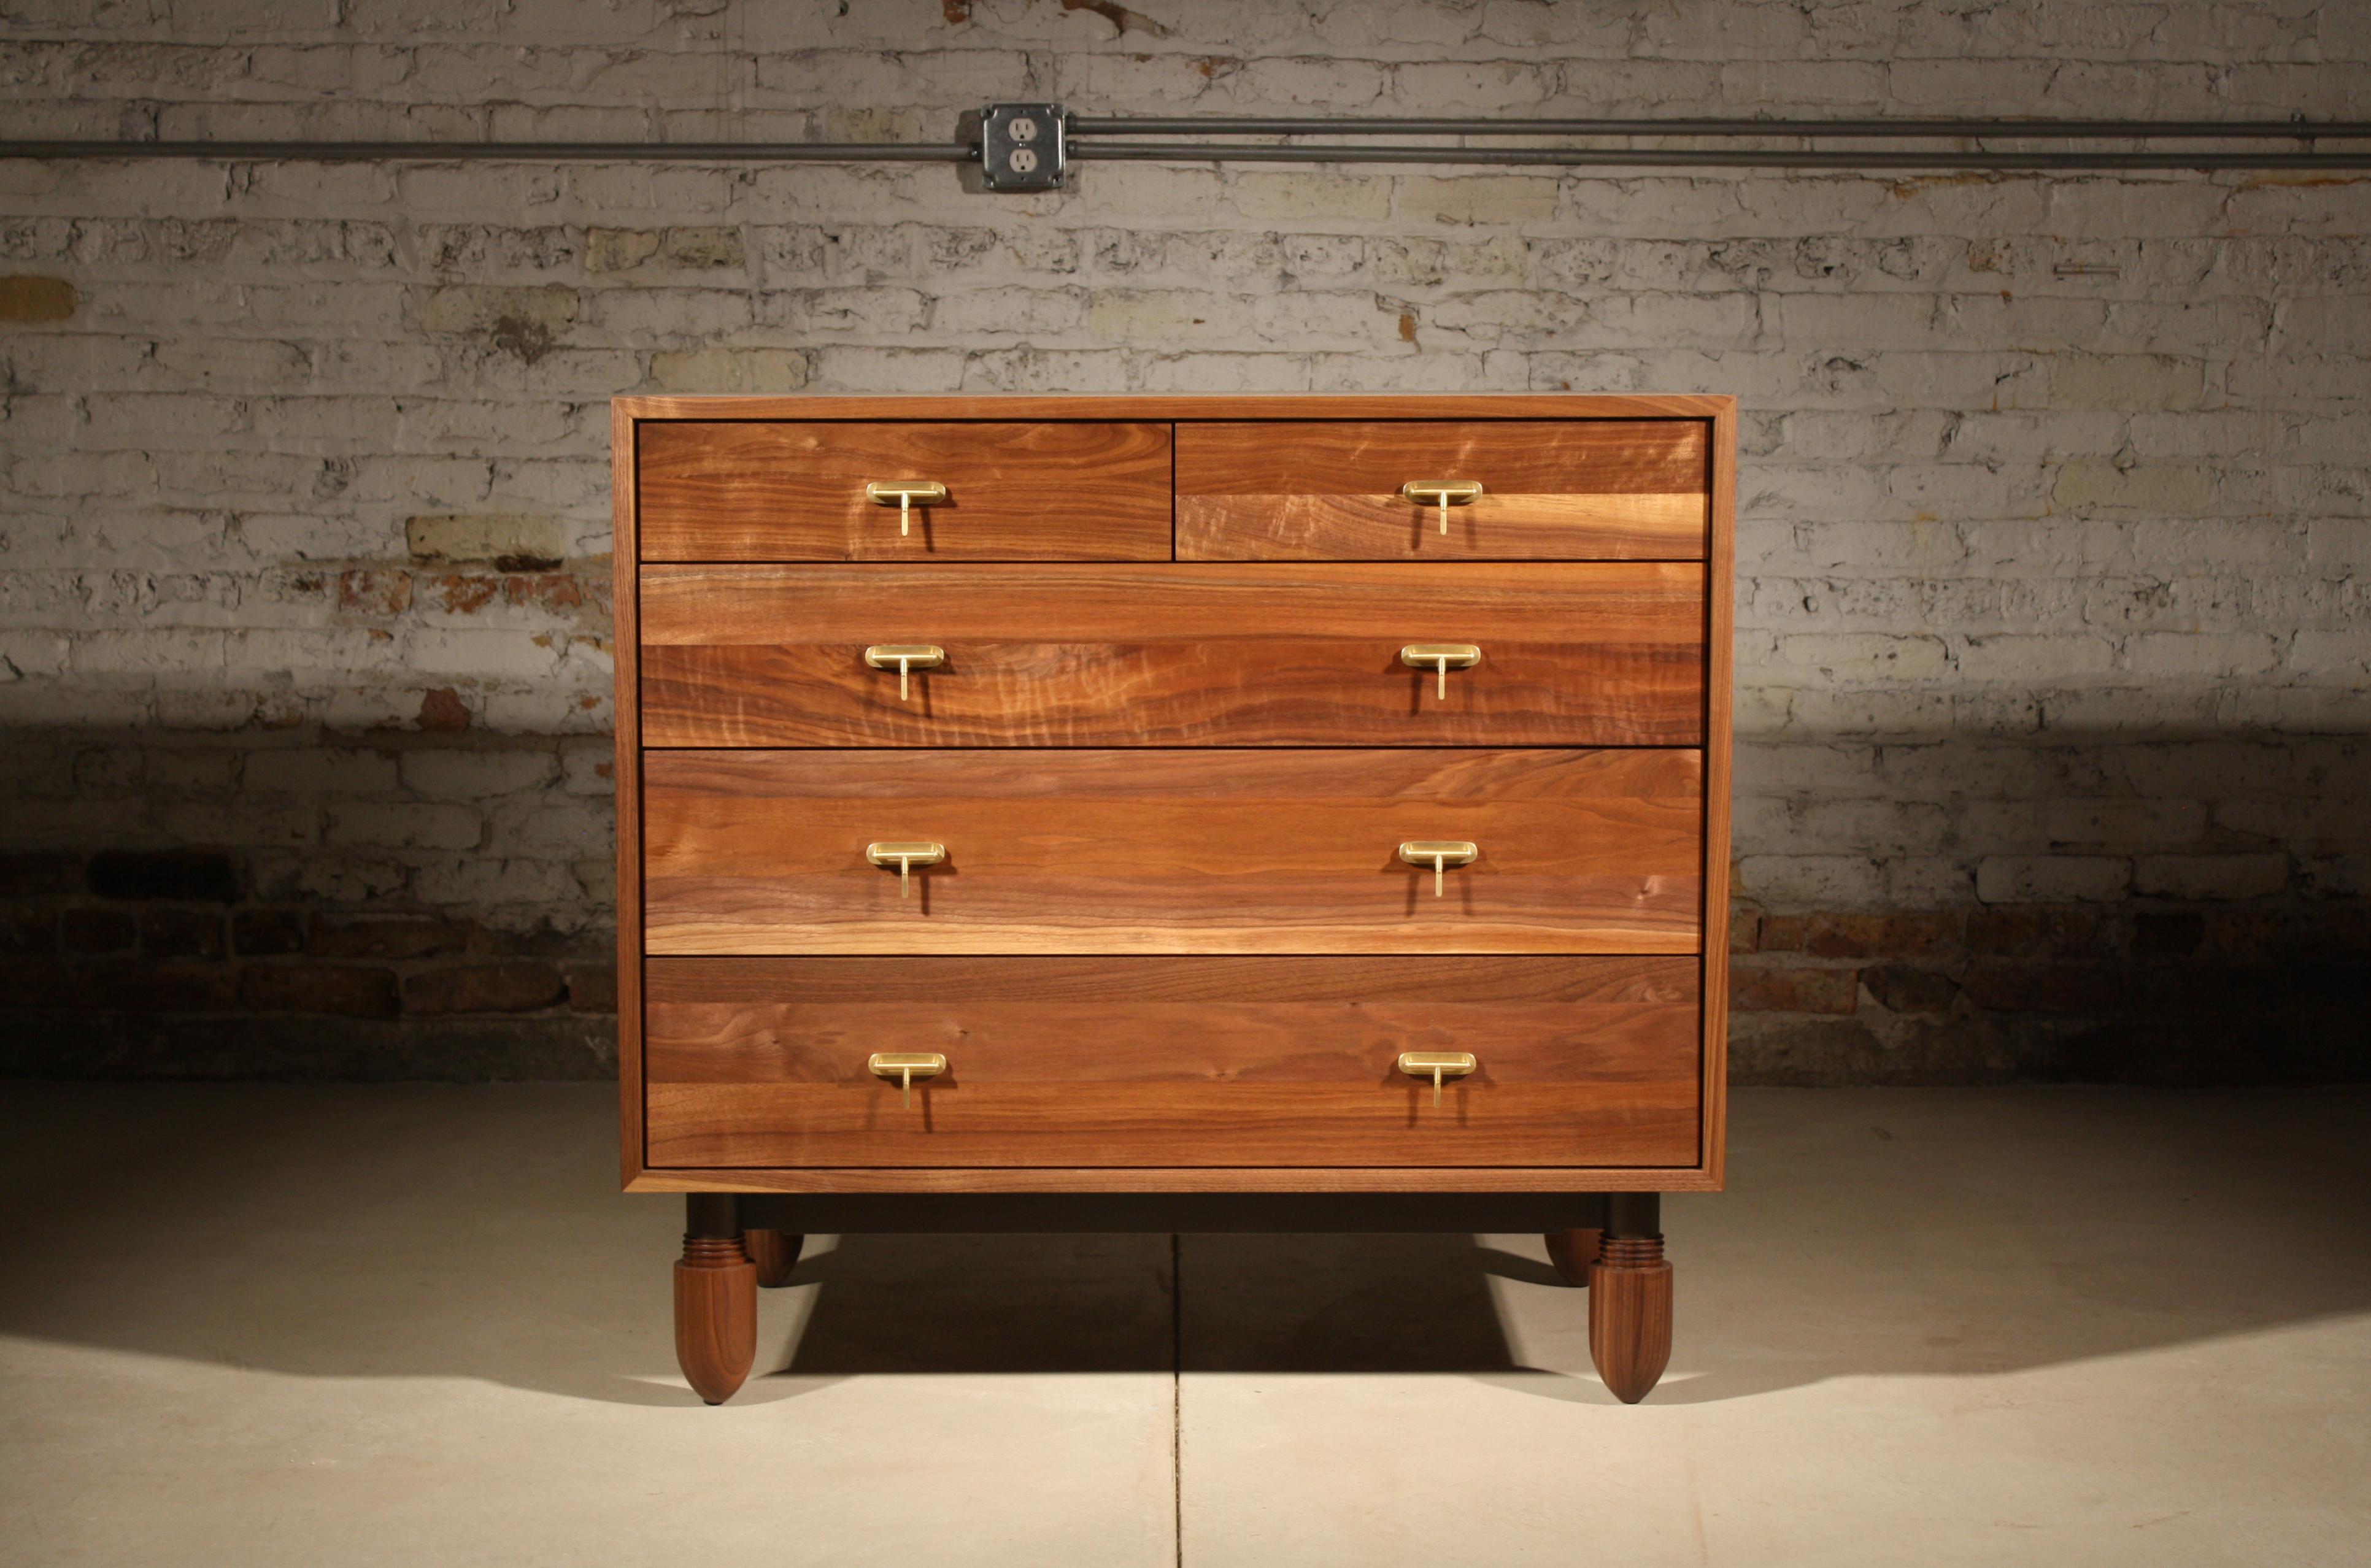 Natural walnut, blackened steel, satin brass, and merino wool felt.

5 Drawers - 40” wide x 36” tall x 24” deep.

Custom dresser built in celebration of both craft and detail. The hand-finished, mitered wood cabinet is filled with felt-lined,